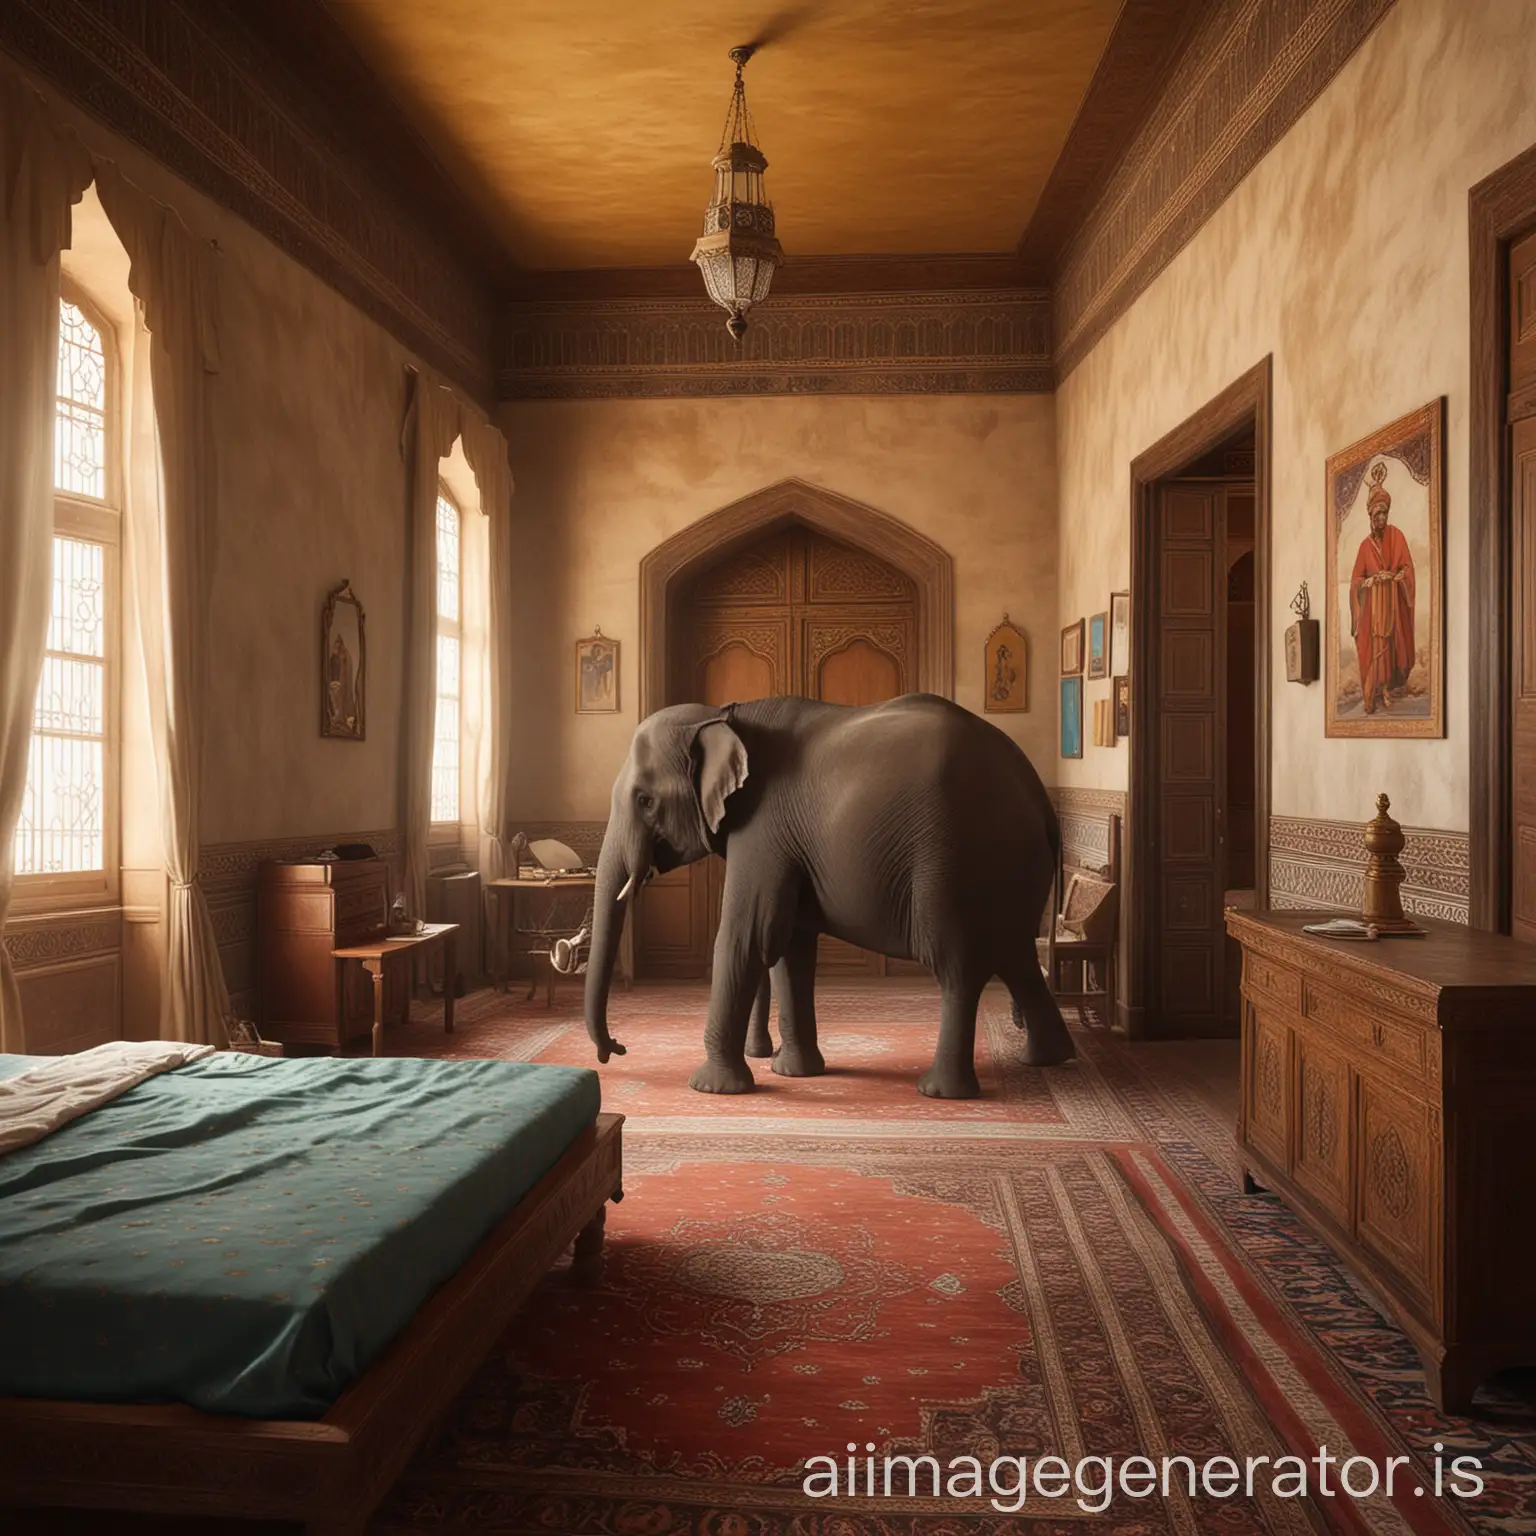 Exploring-the-Sultans-Palace-FirstPerson-Elephant-Adventure-Game